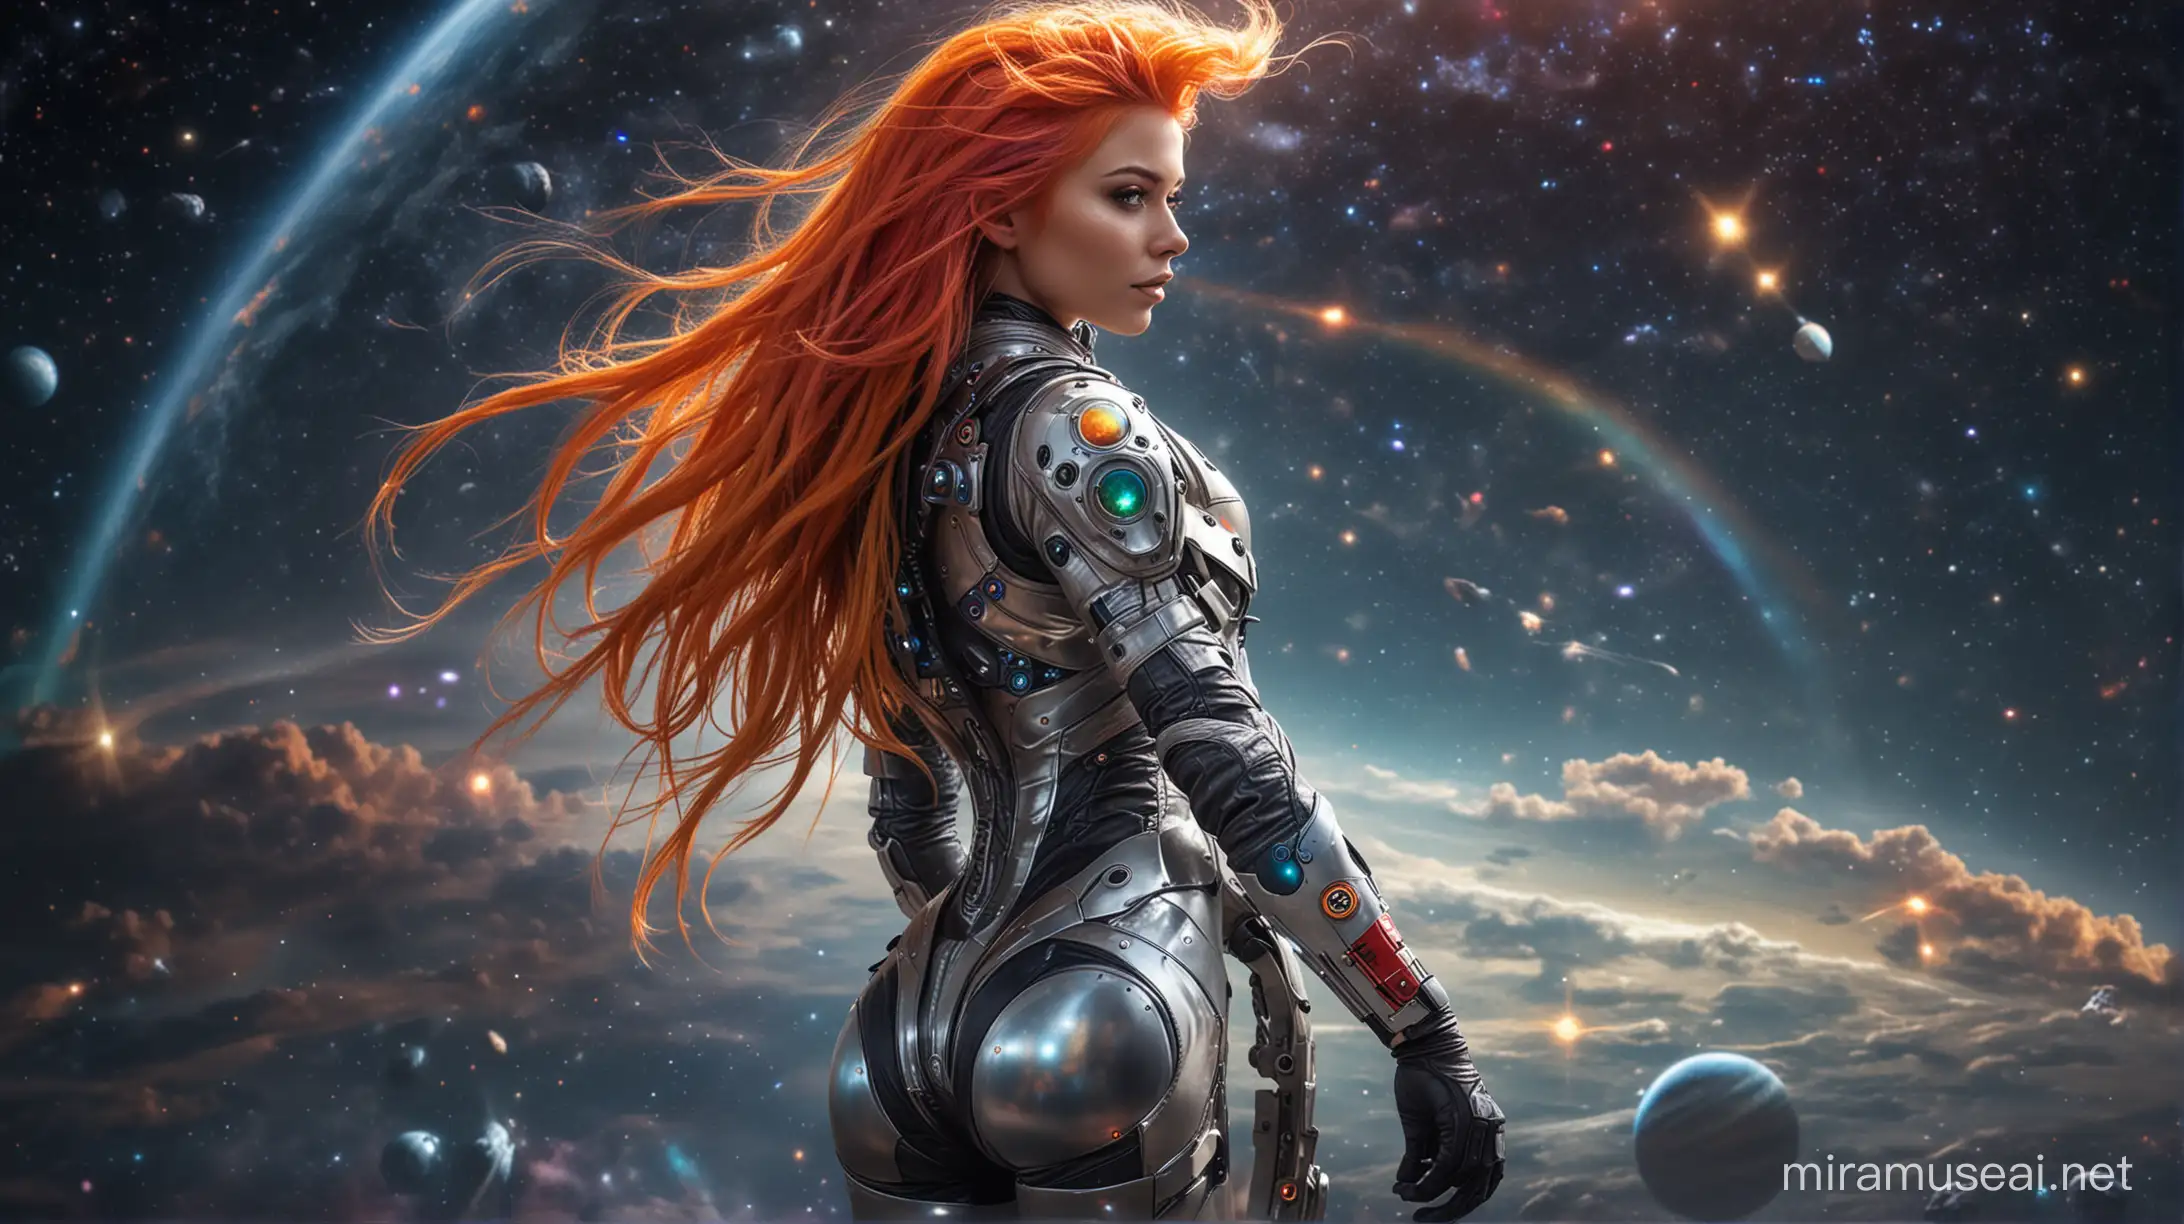 Colorful Armored Space Explorer with Rainbow Hair